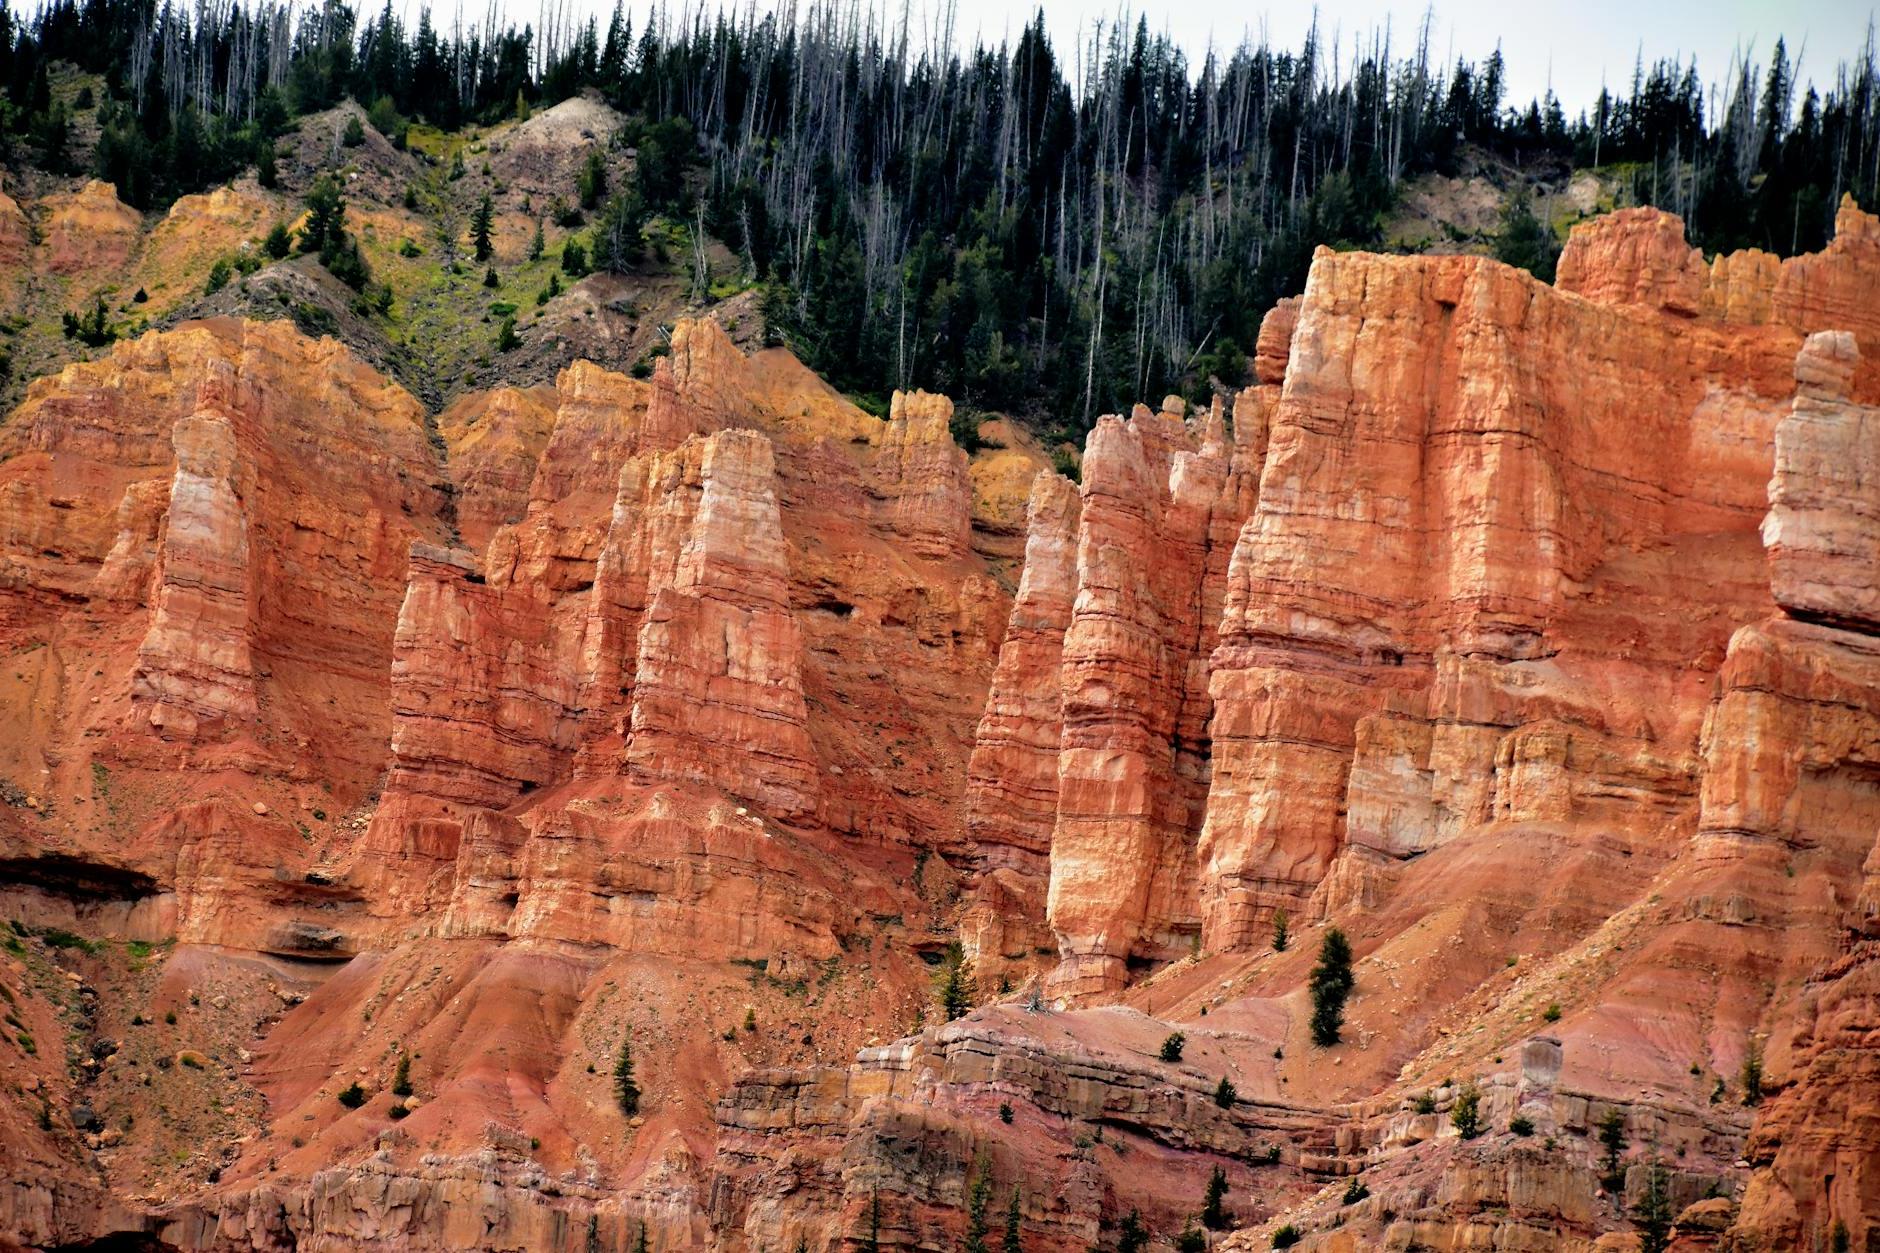 A view of a canyon with red rocks and trees